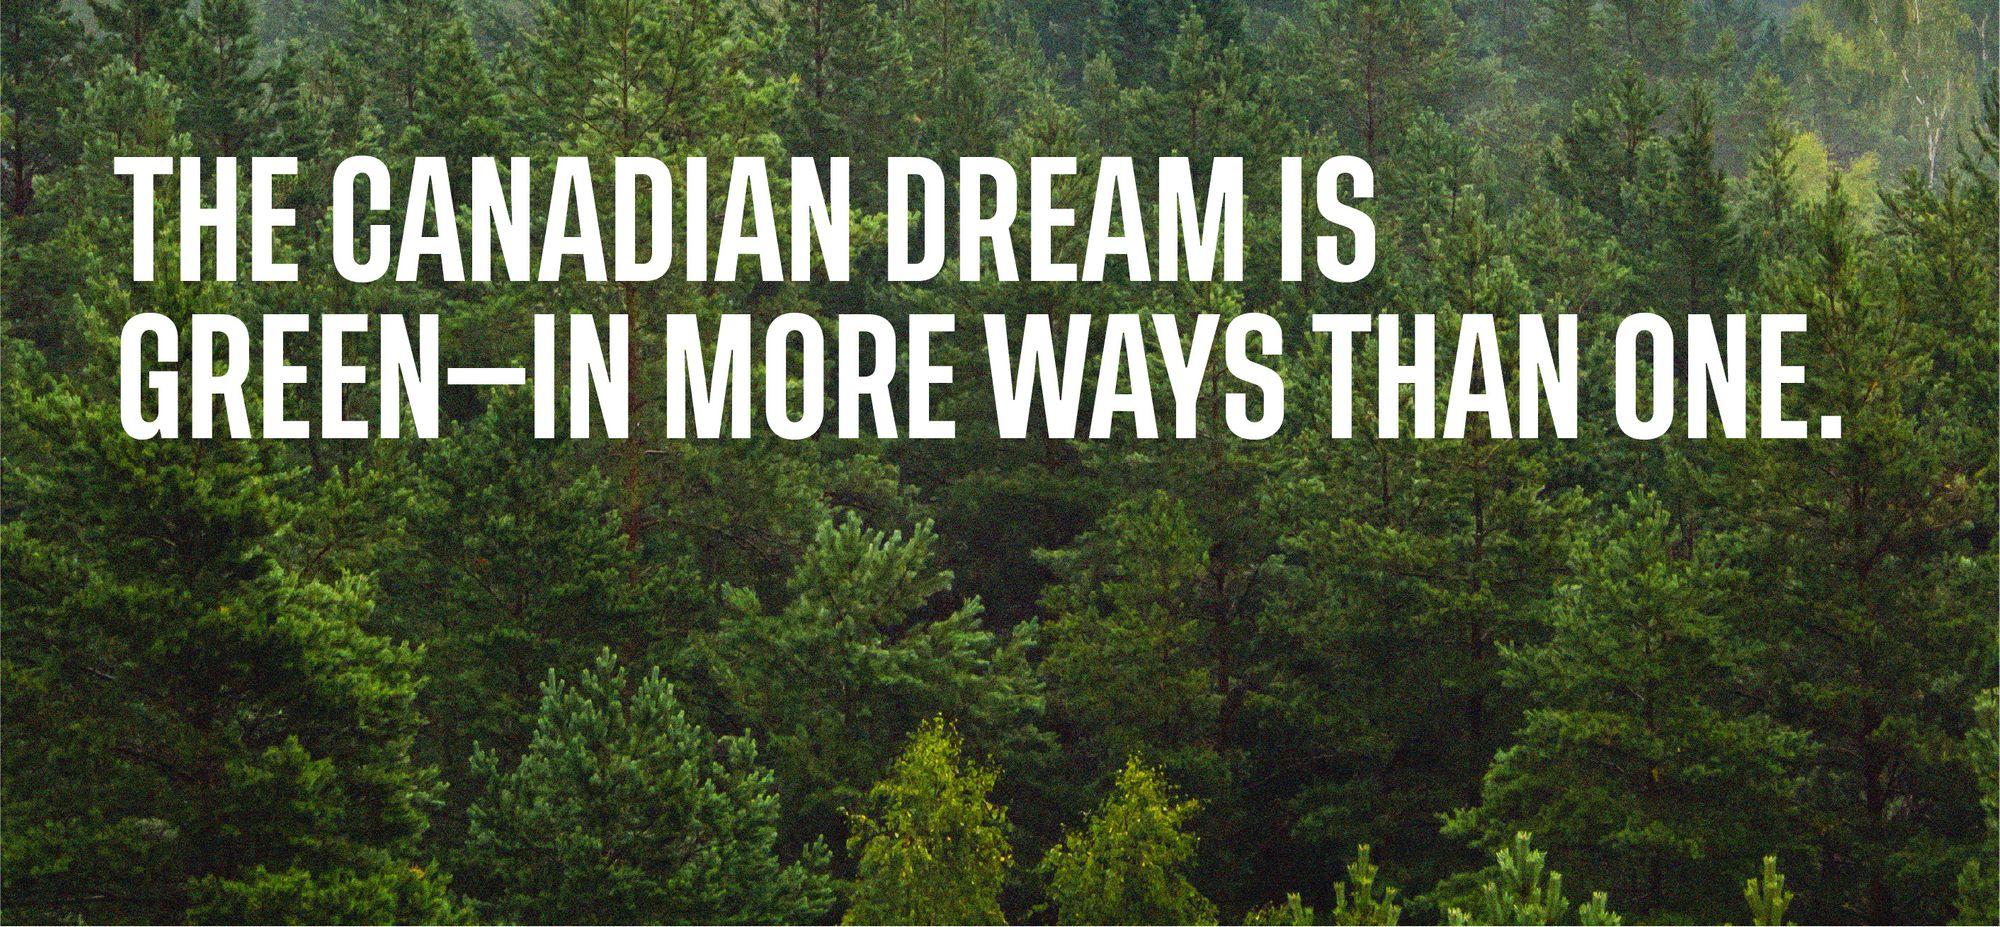 The Canadian Dream is green—in more ways than one.